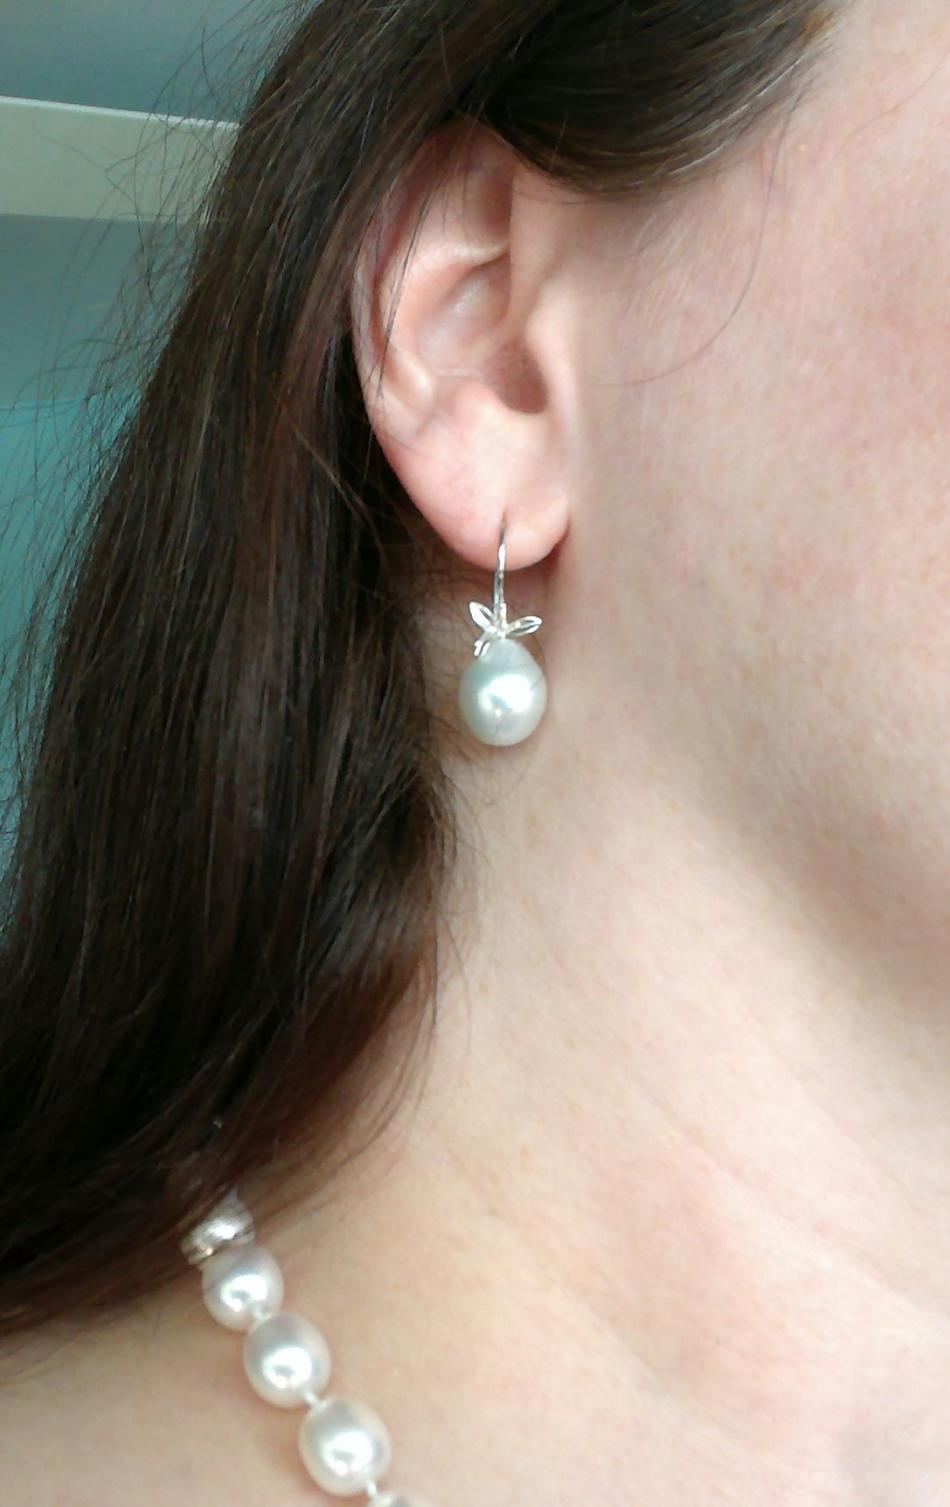 11-12 mm drop earrings are from my first trip to Pearl Paradise in 2014